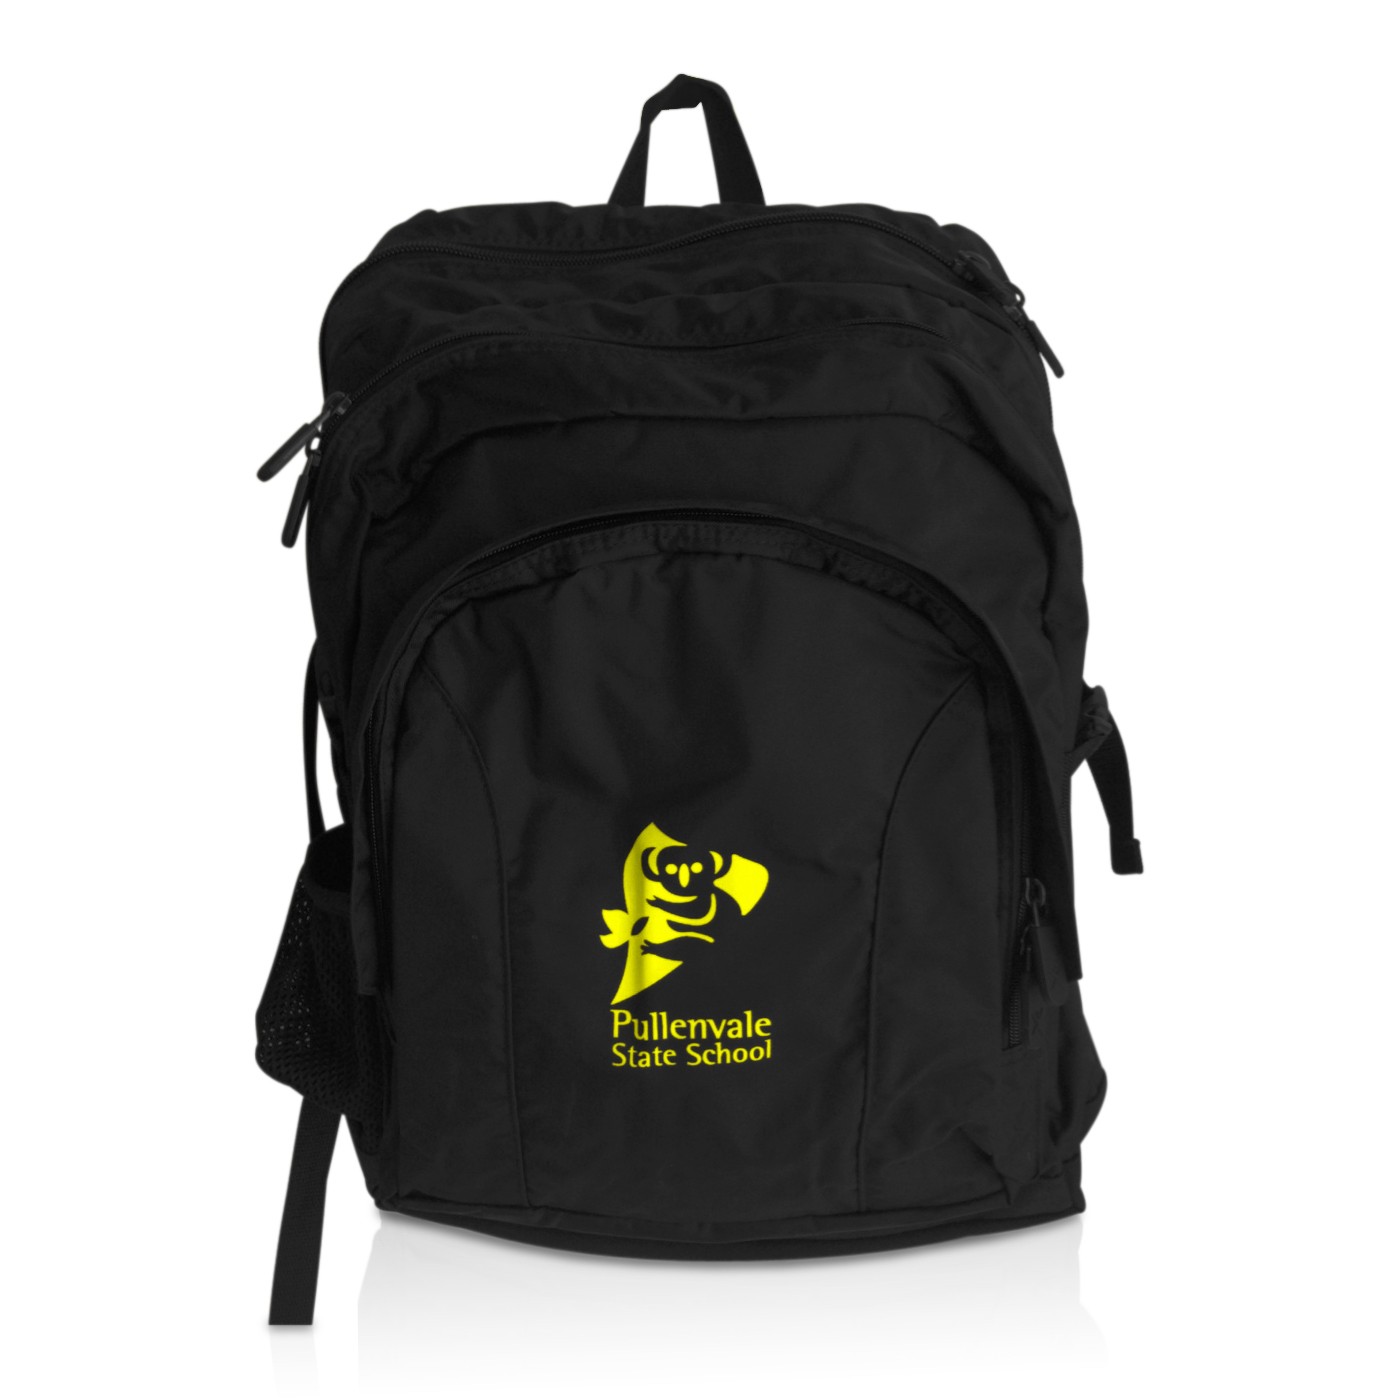 SS School Bag Pullenvale - Accessories - Pullenvale State School ...